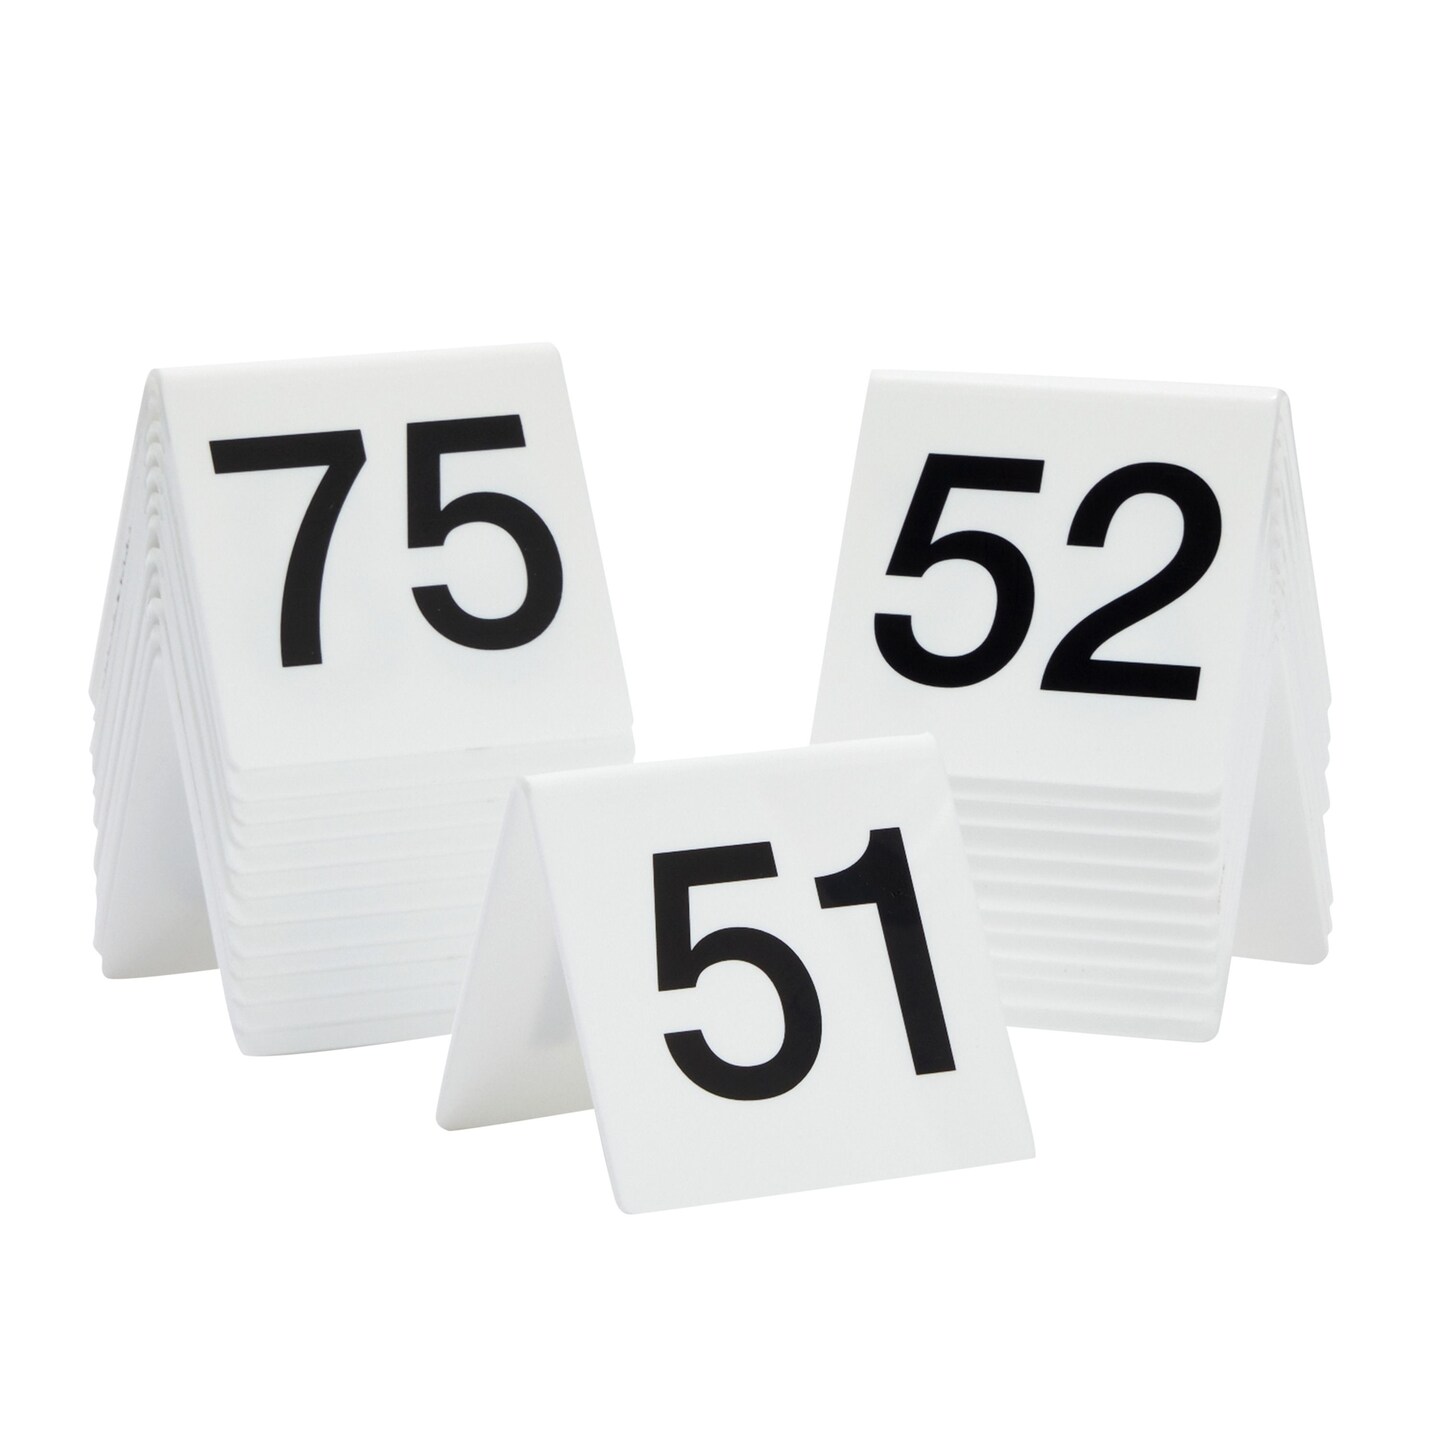 Set of 25 Acrylic Table Numbers for Wedding Reception, Plastic Tent Cards Numbered 51-75 for Restaurants, Banquets (3 x 2.75 x 2.5 In)